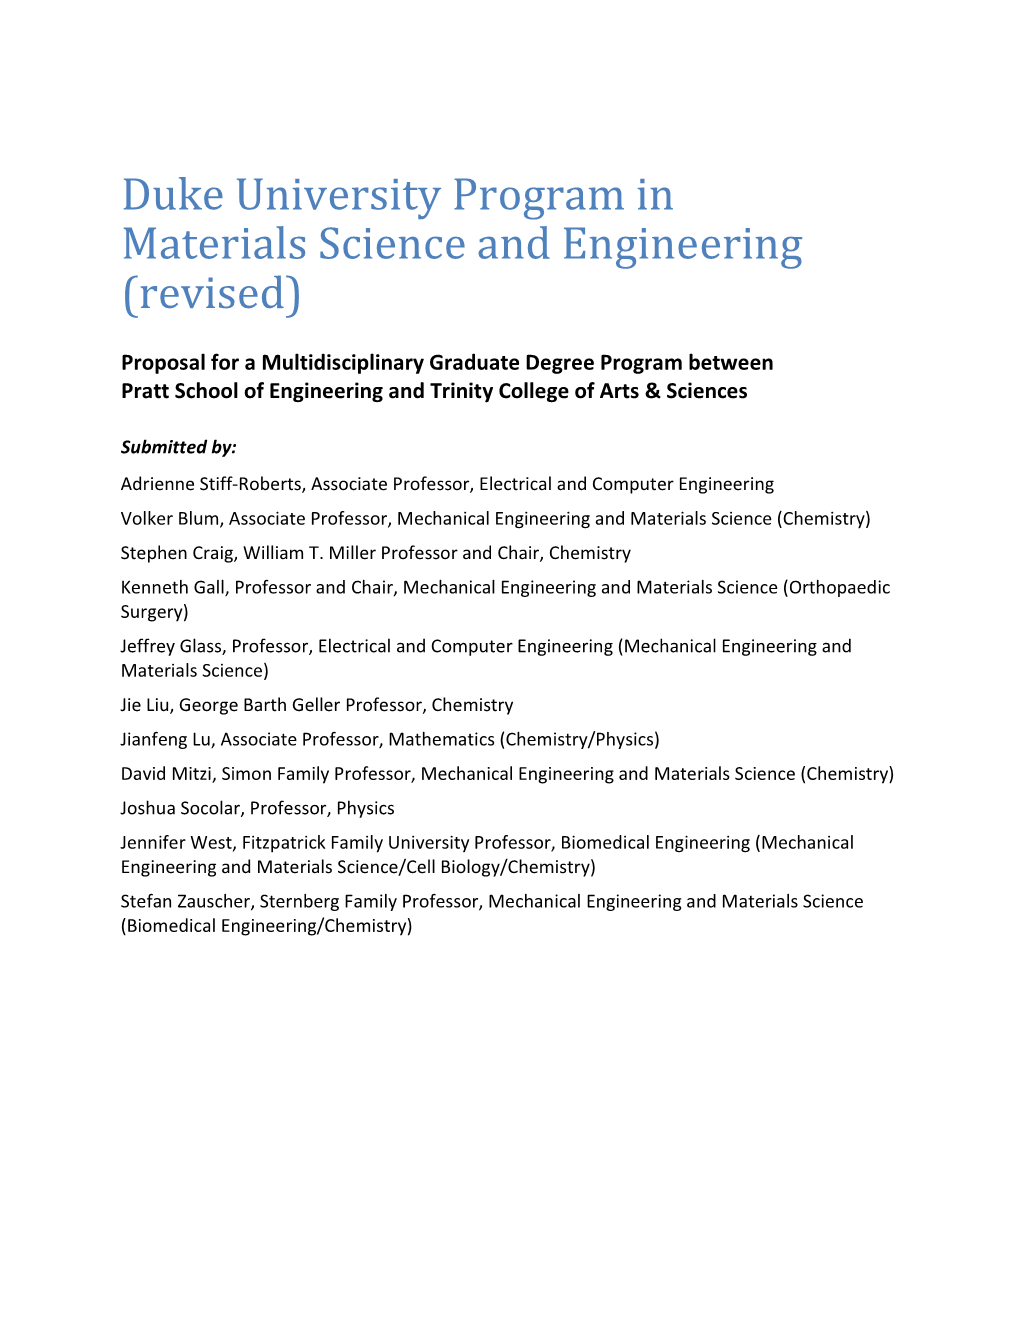 Duke University Program in Materials Science and Engineering (Revised)